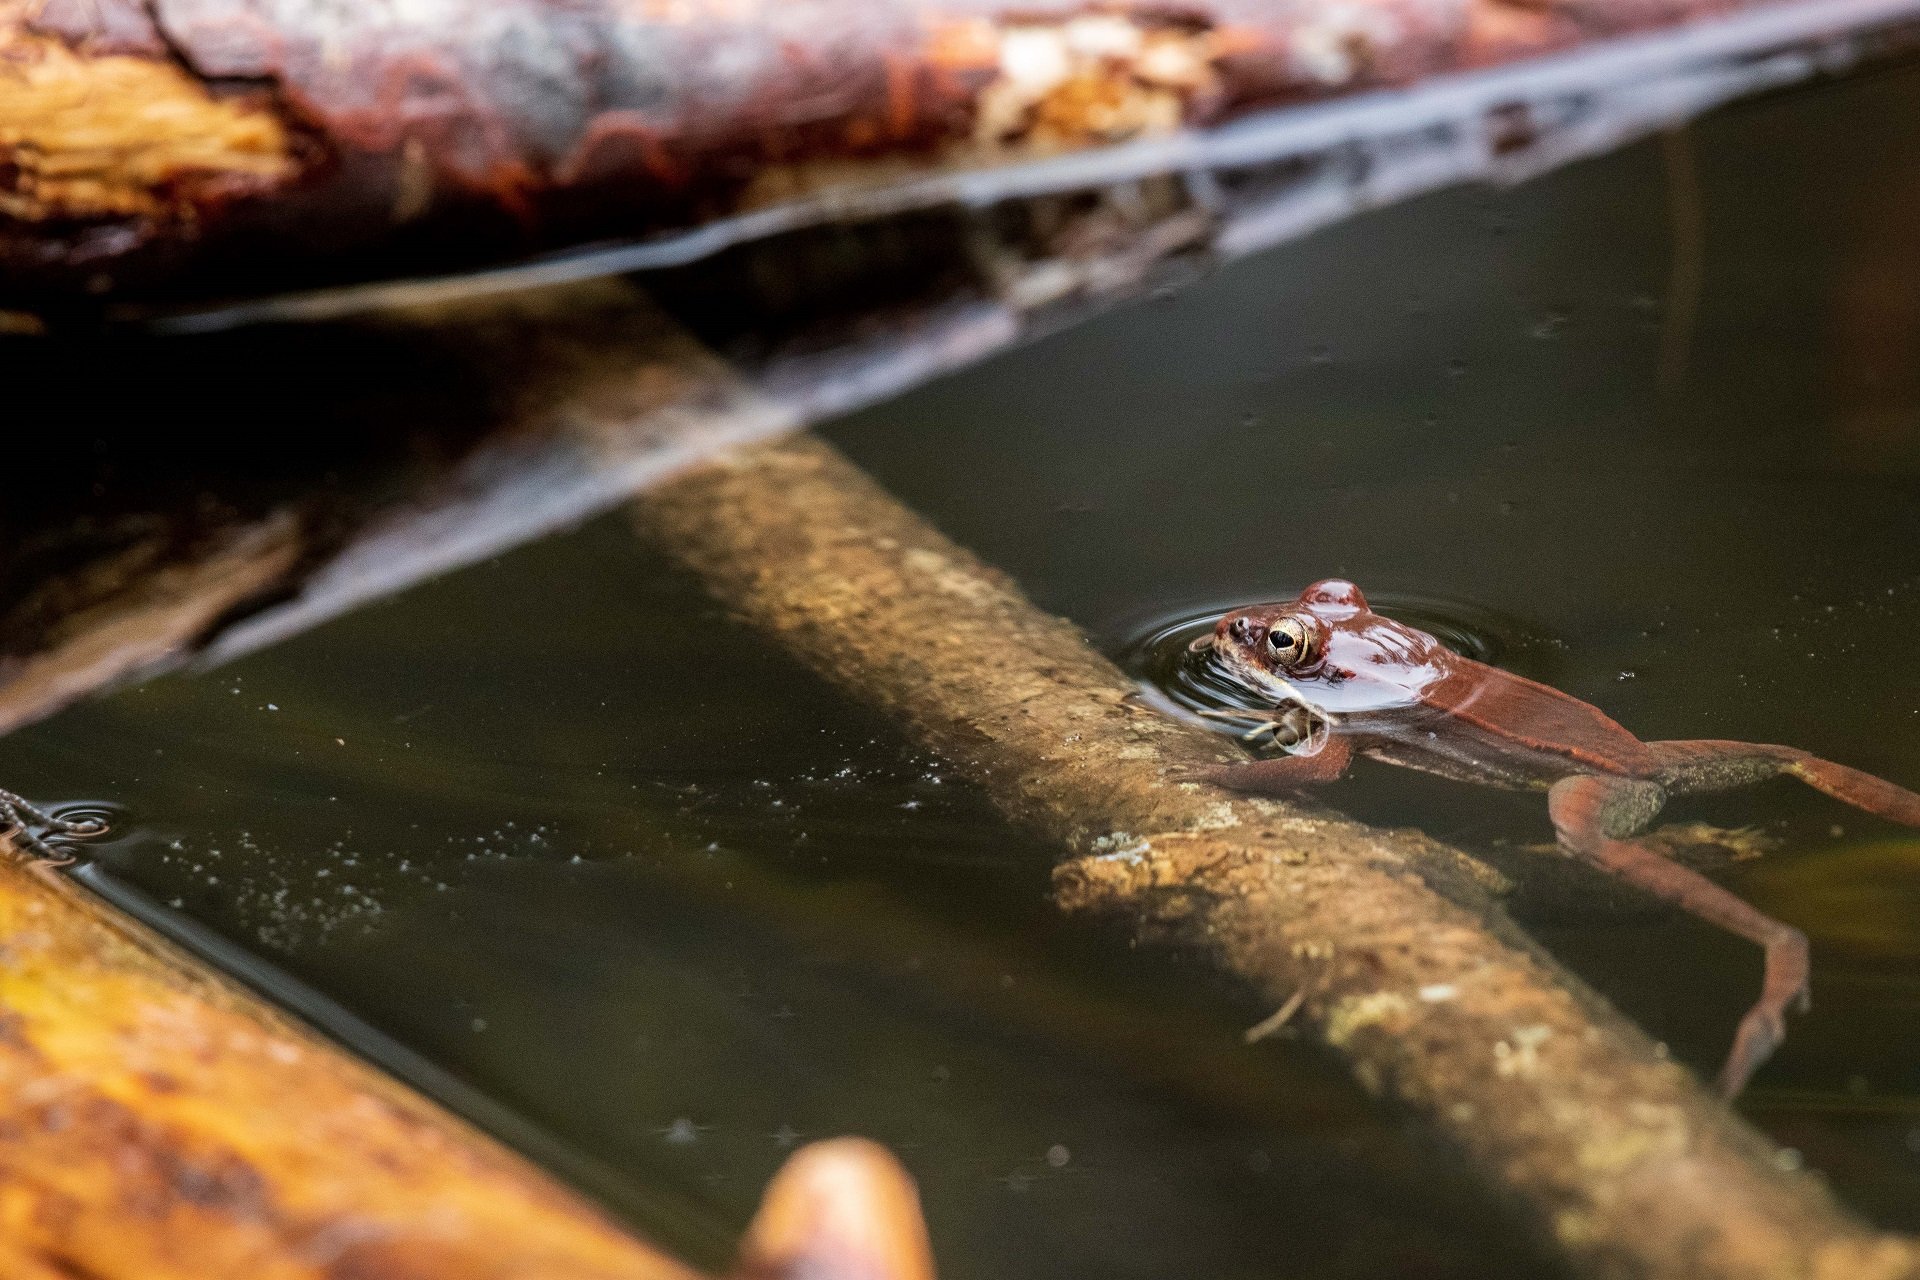 A Wood Frog rests a forearm on a sunken branch in the water.